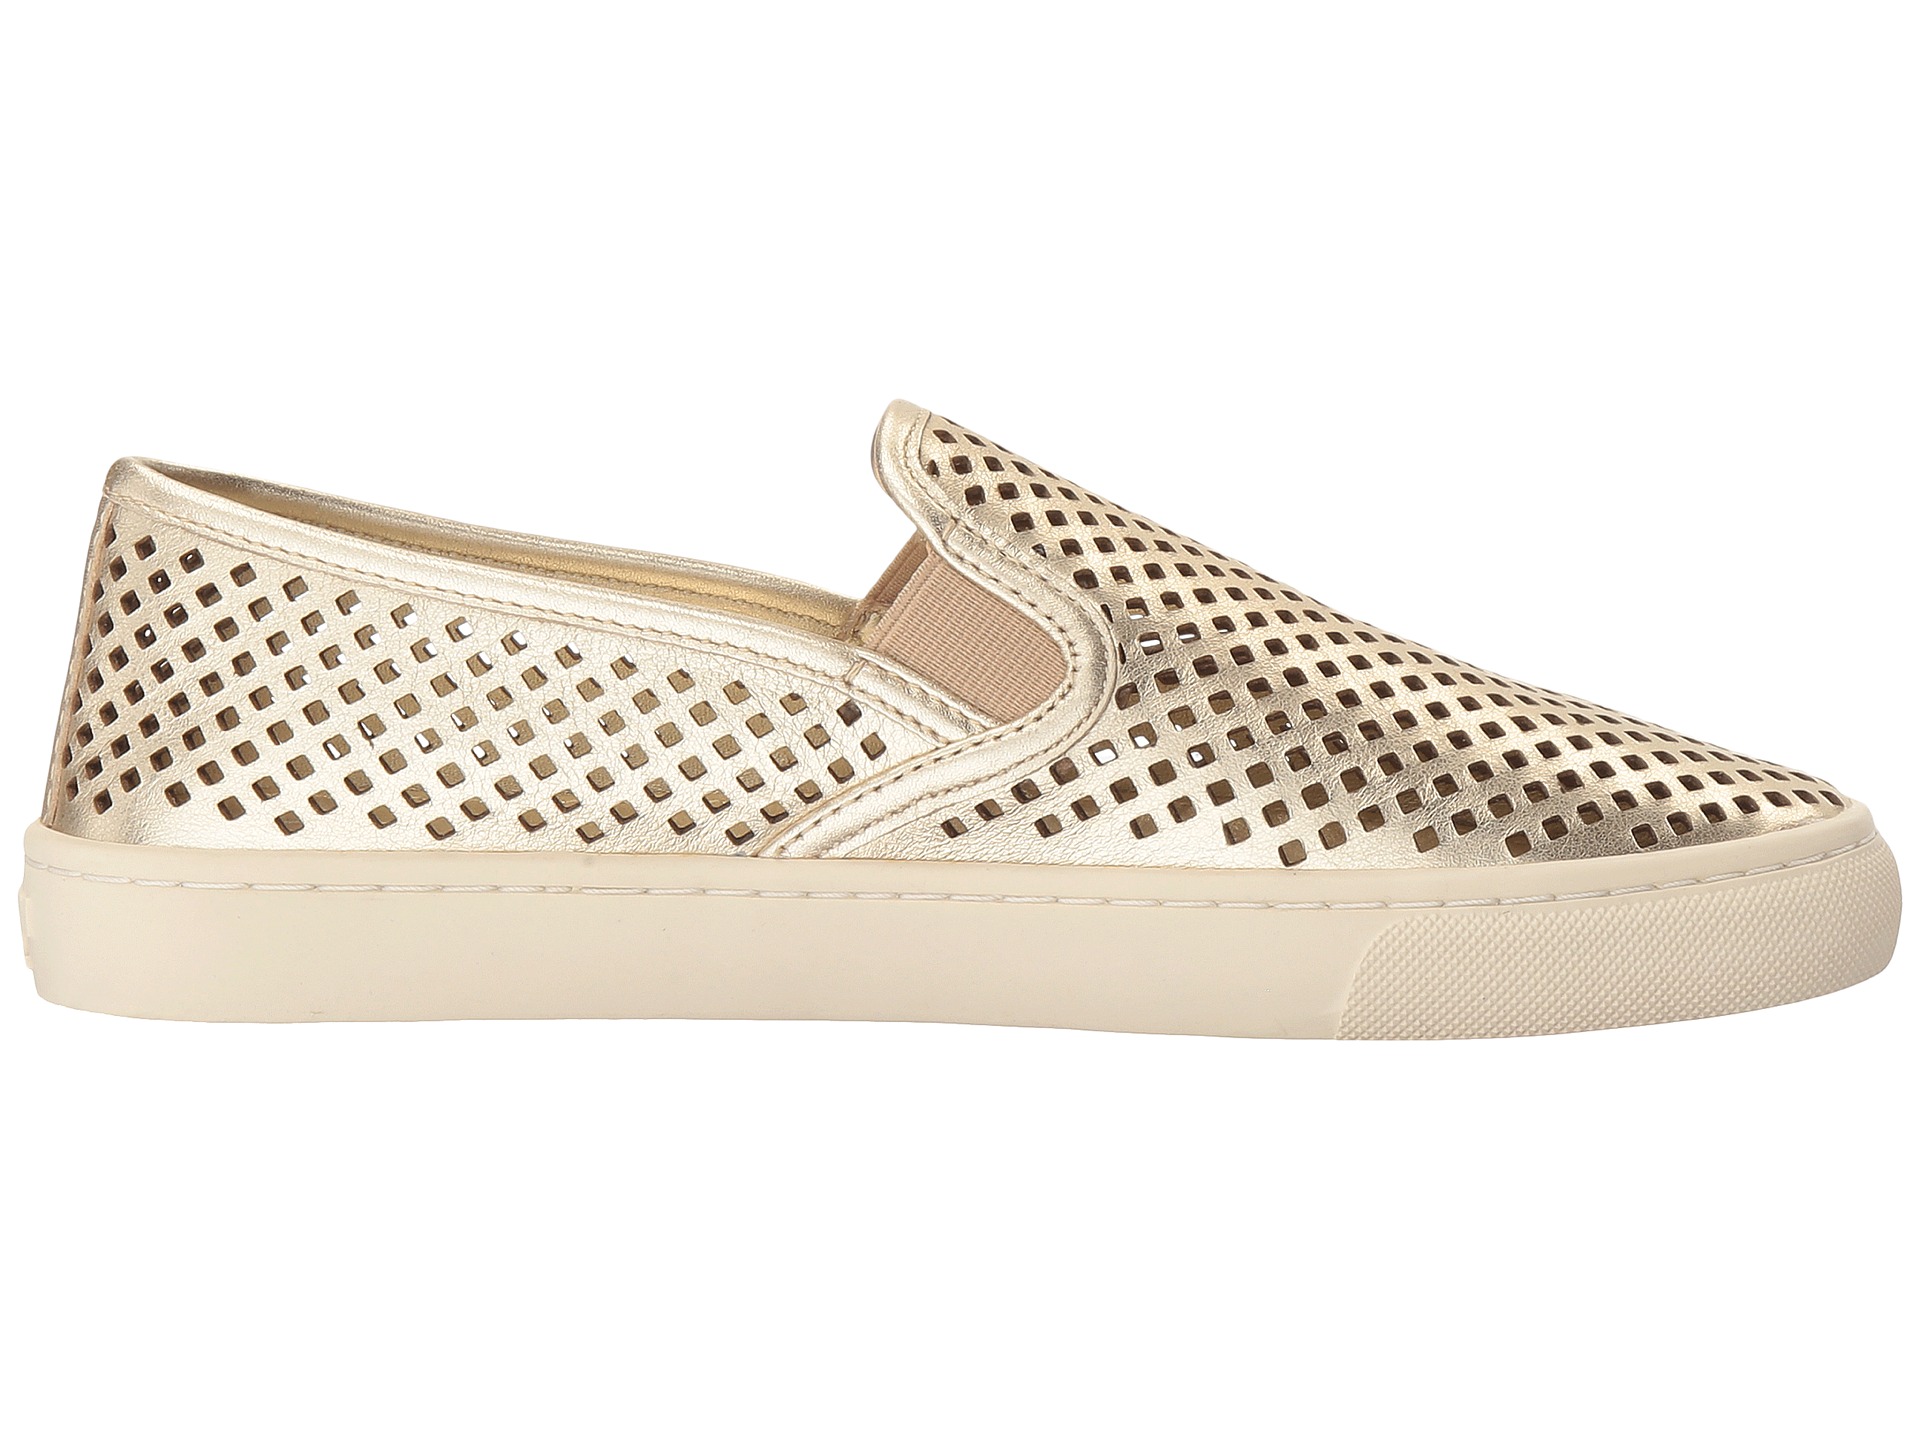 Tory Burch Jesse Perforated Sneaker Spark Gold - Zappos.com Free ...